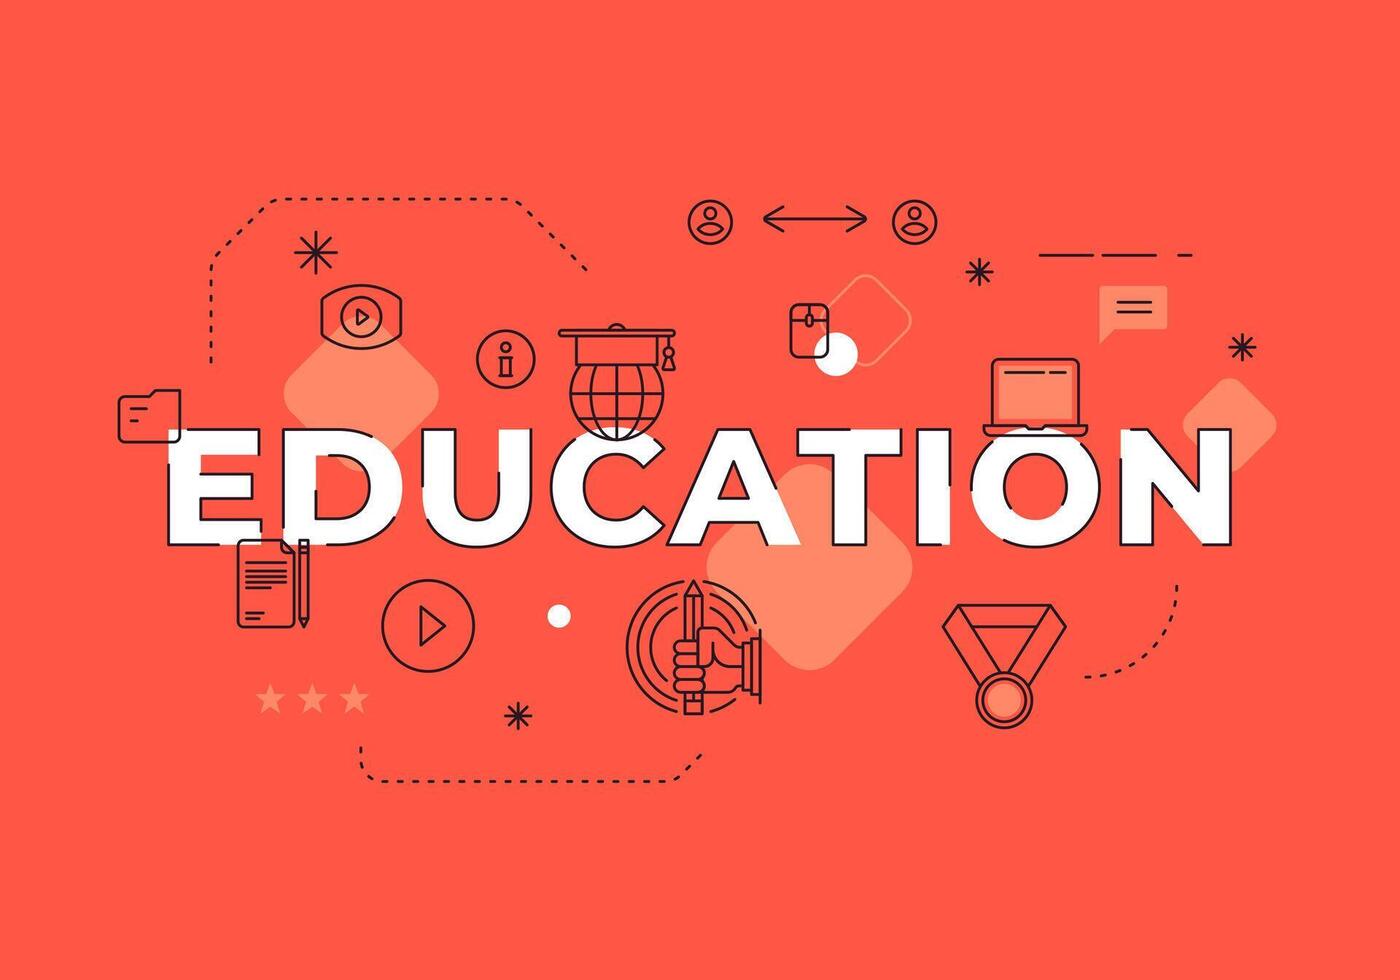 Education text concept modern flat style illustration red banner with outline icons vector